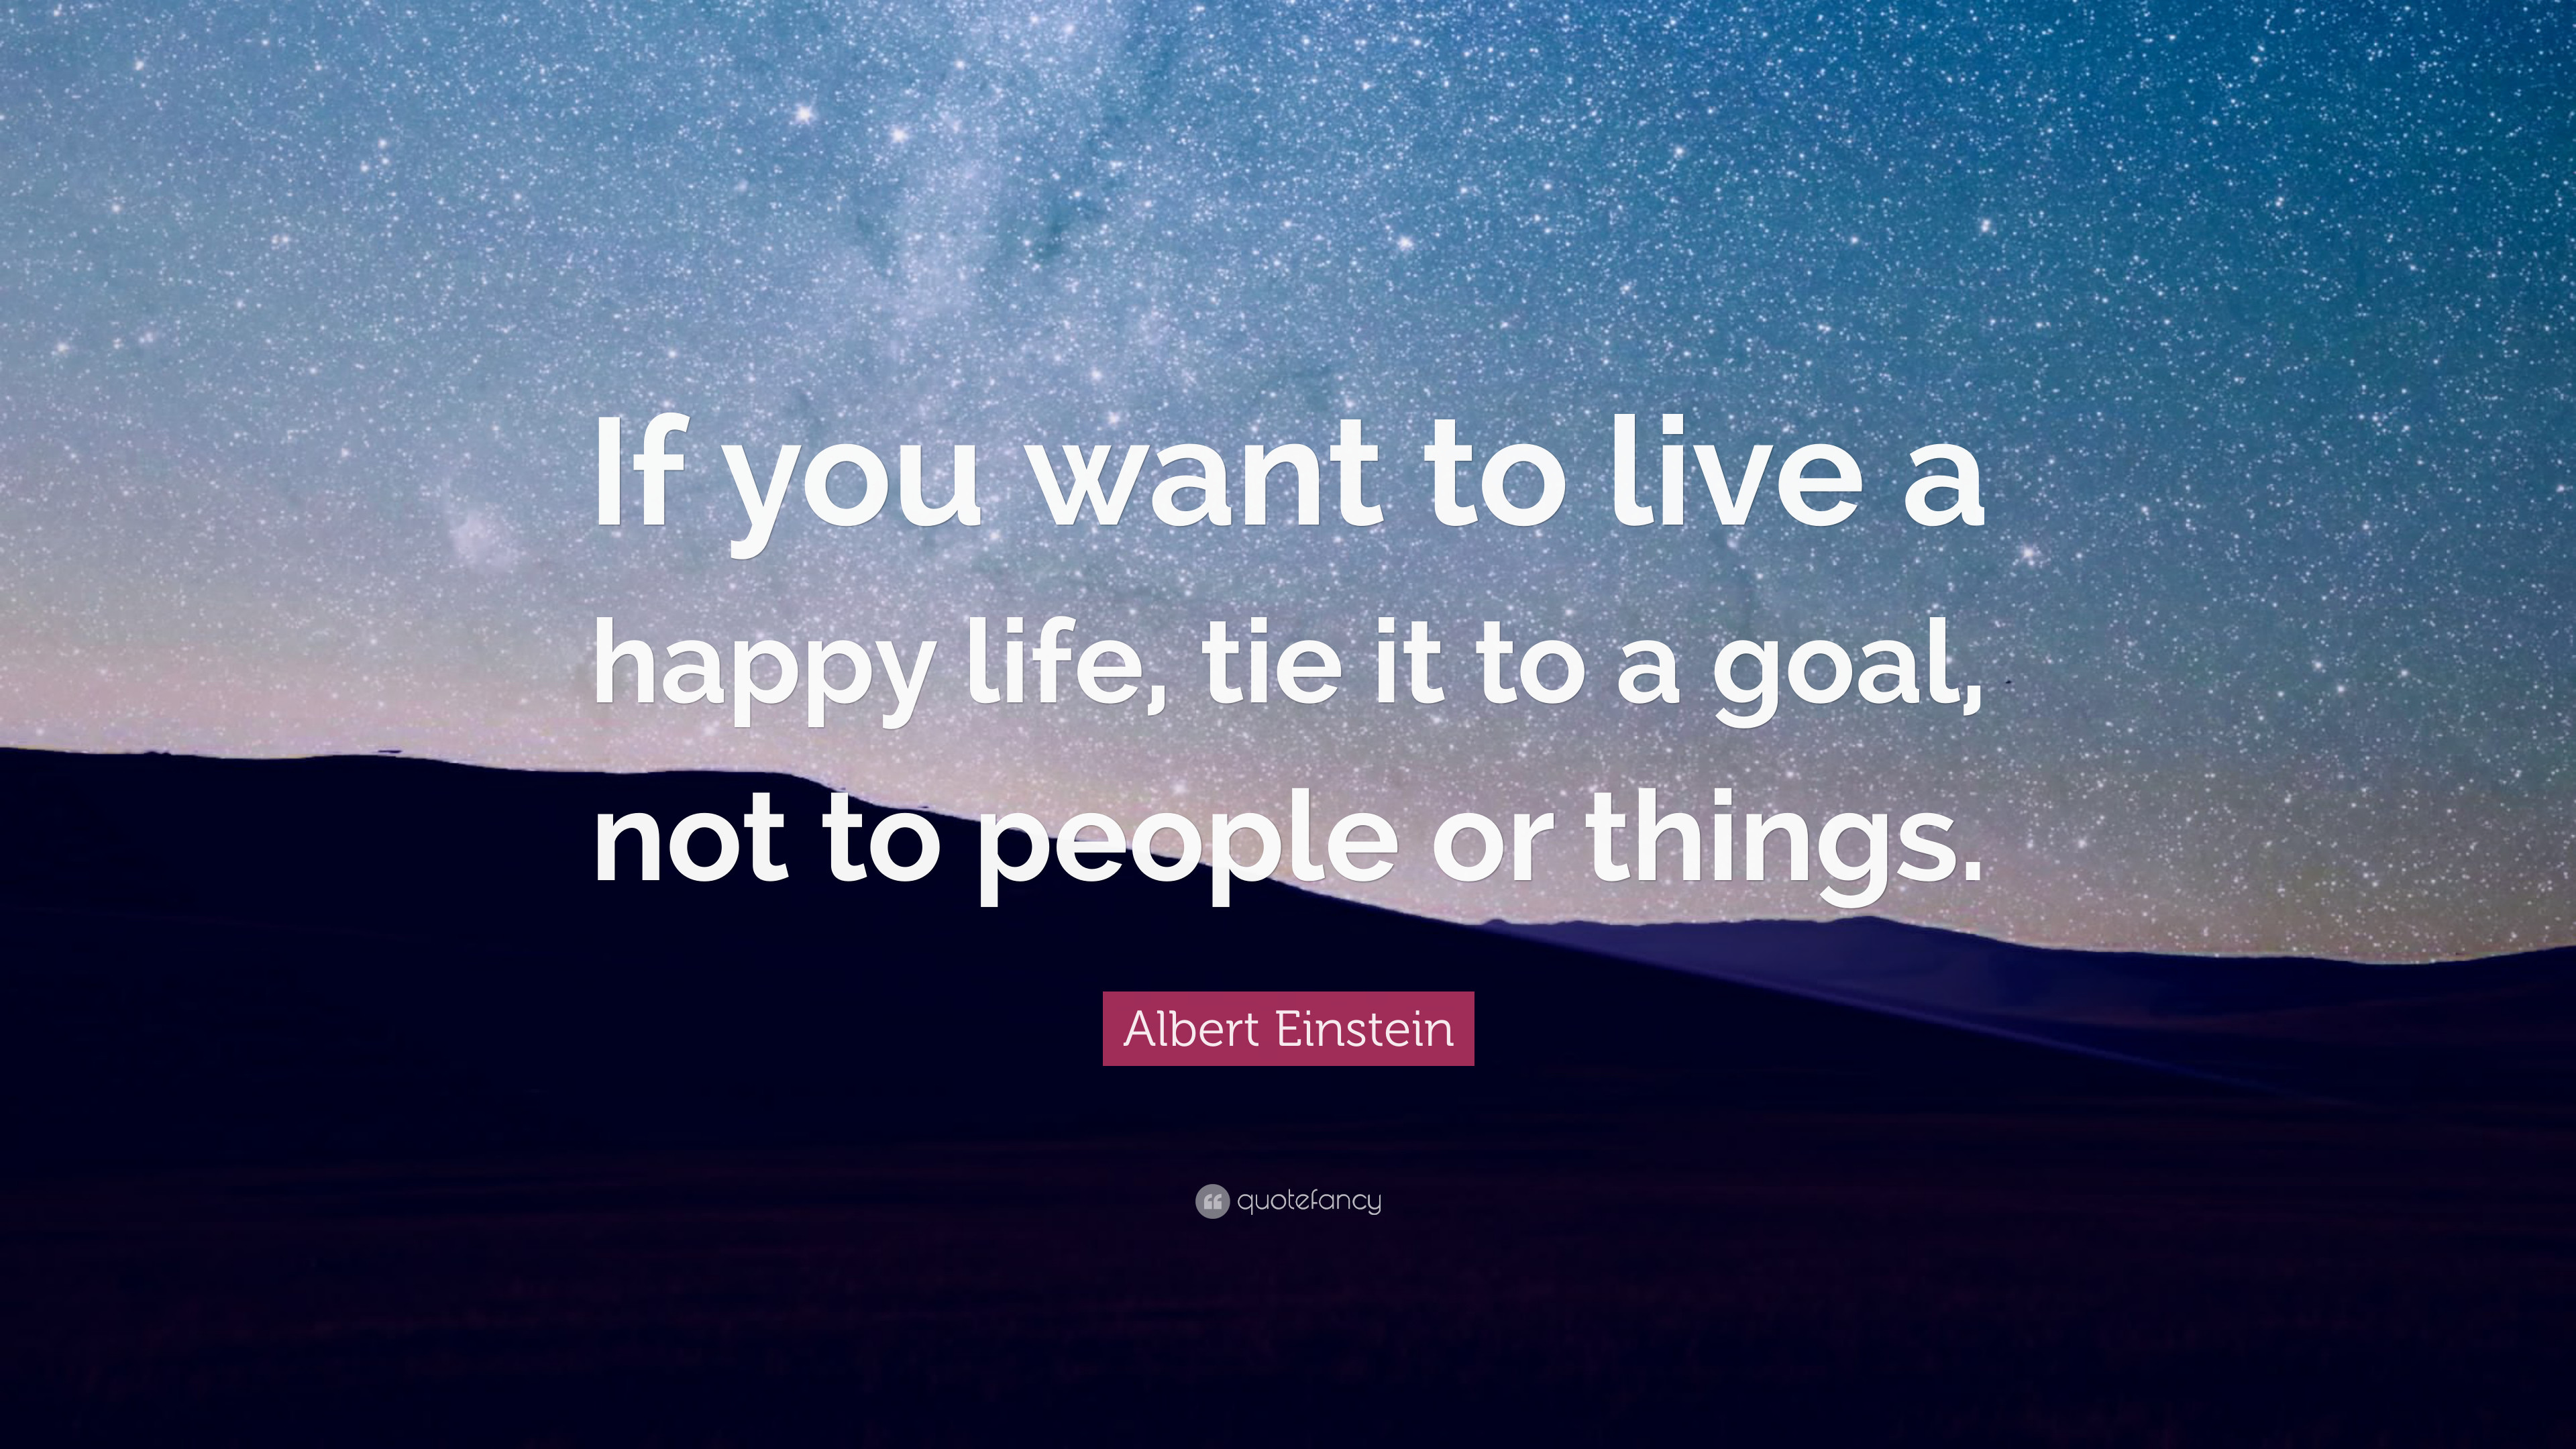 3840x2160 Albert Einstein Quote: “If you want to live a happy life, tie it